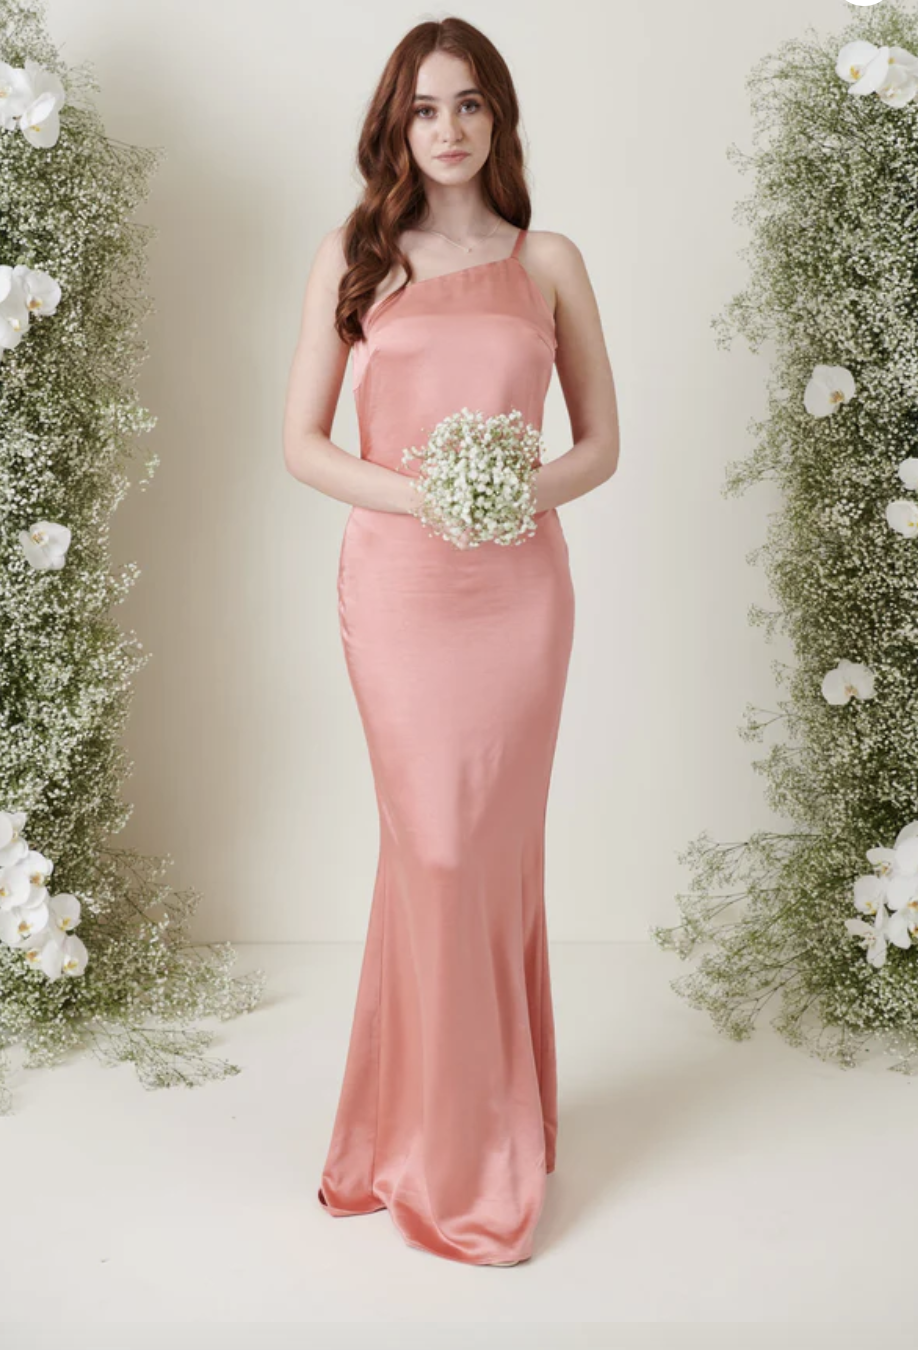 Amazing Prom Gowns under 100 from Recognized Provider chicdresses.co.uk